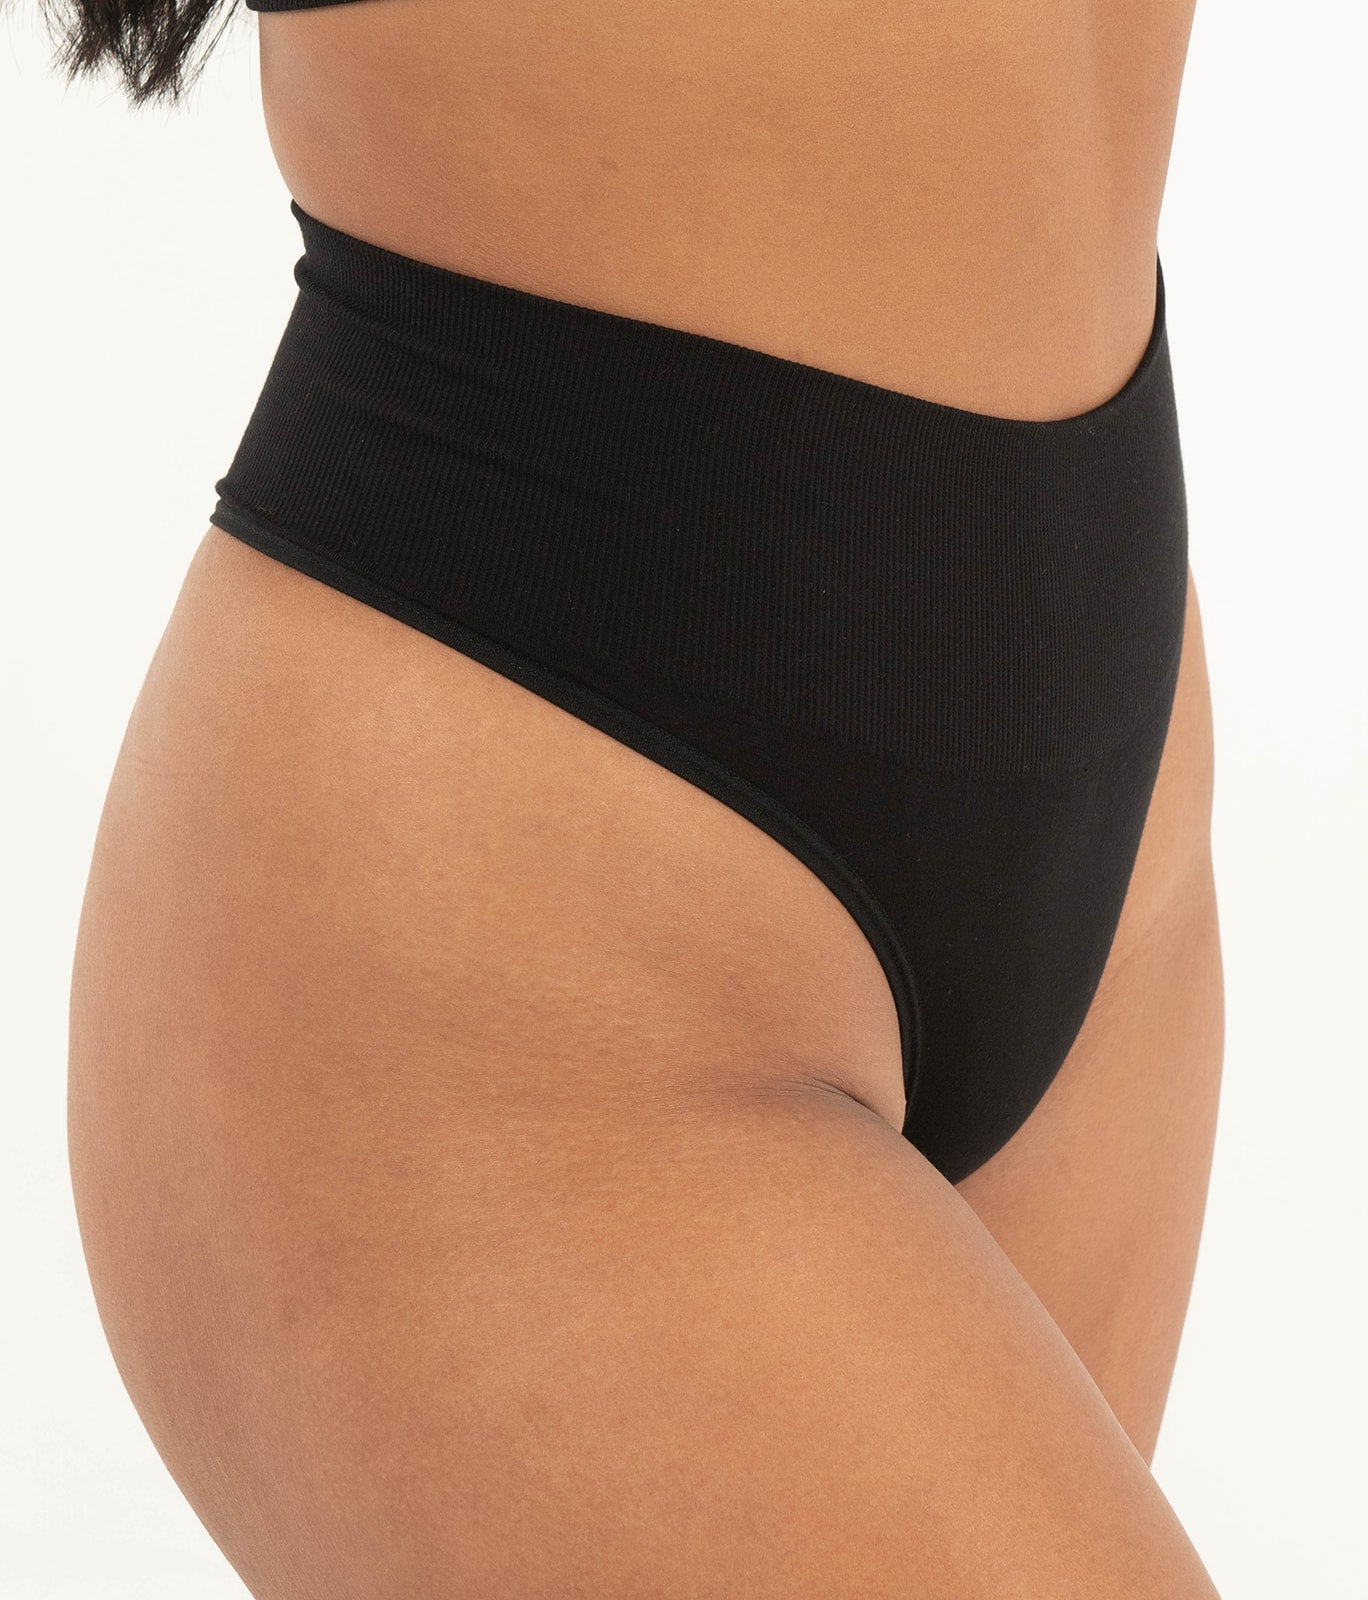 ChiChi G String Mixed 4 Set - Black/Marle Grey - Firm Compression Waistband